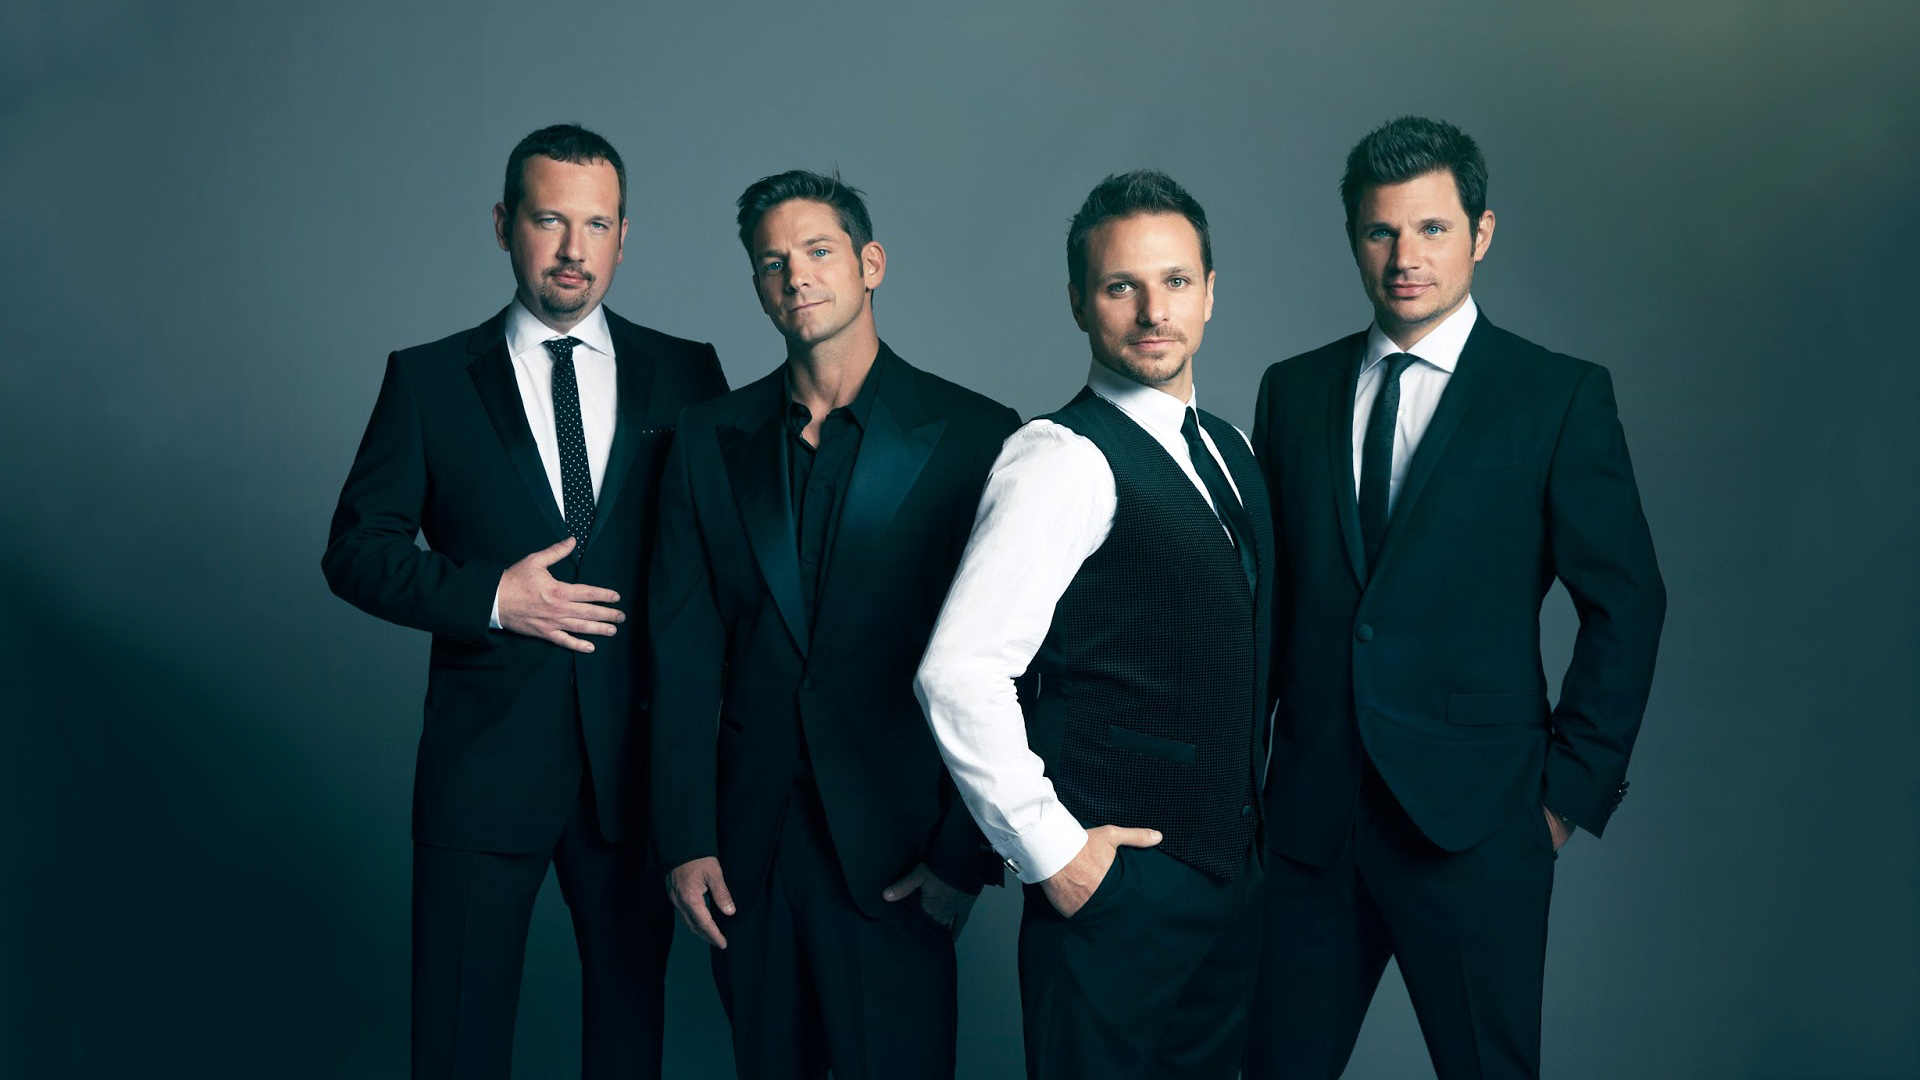 The Love That Youve Been Looking For. av 98 Degrees